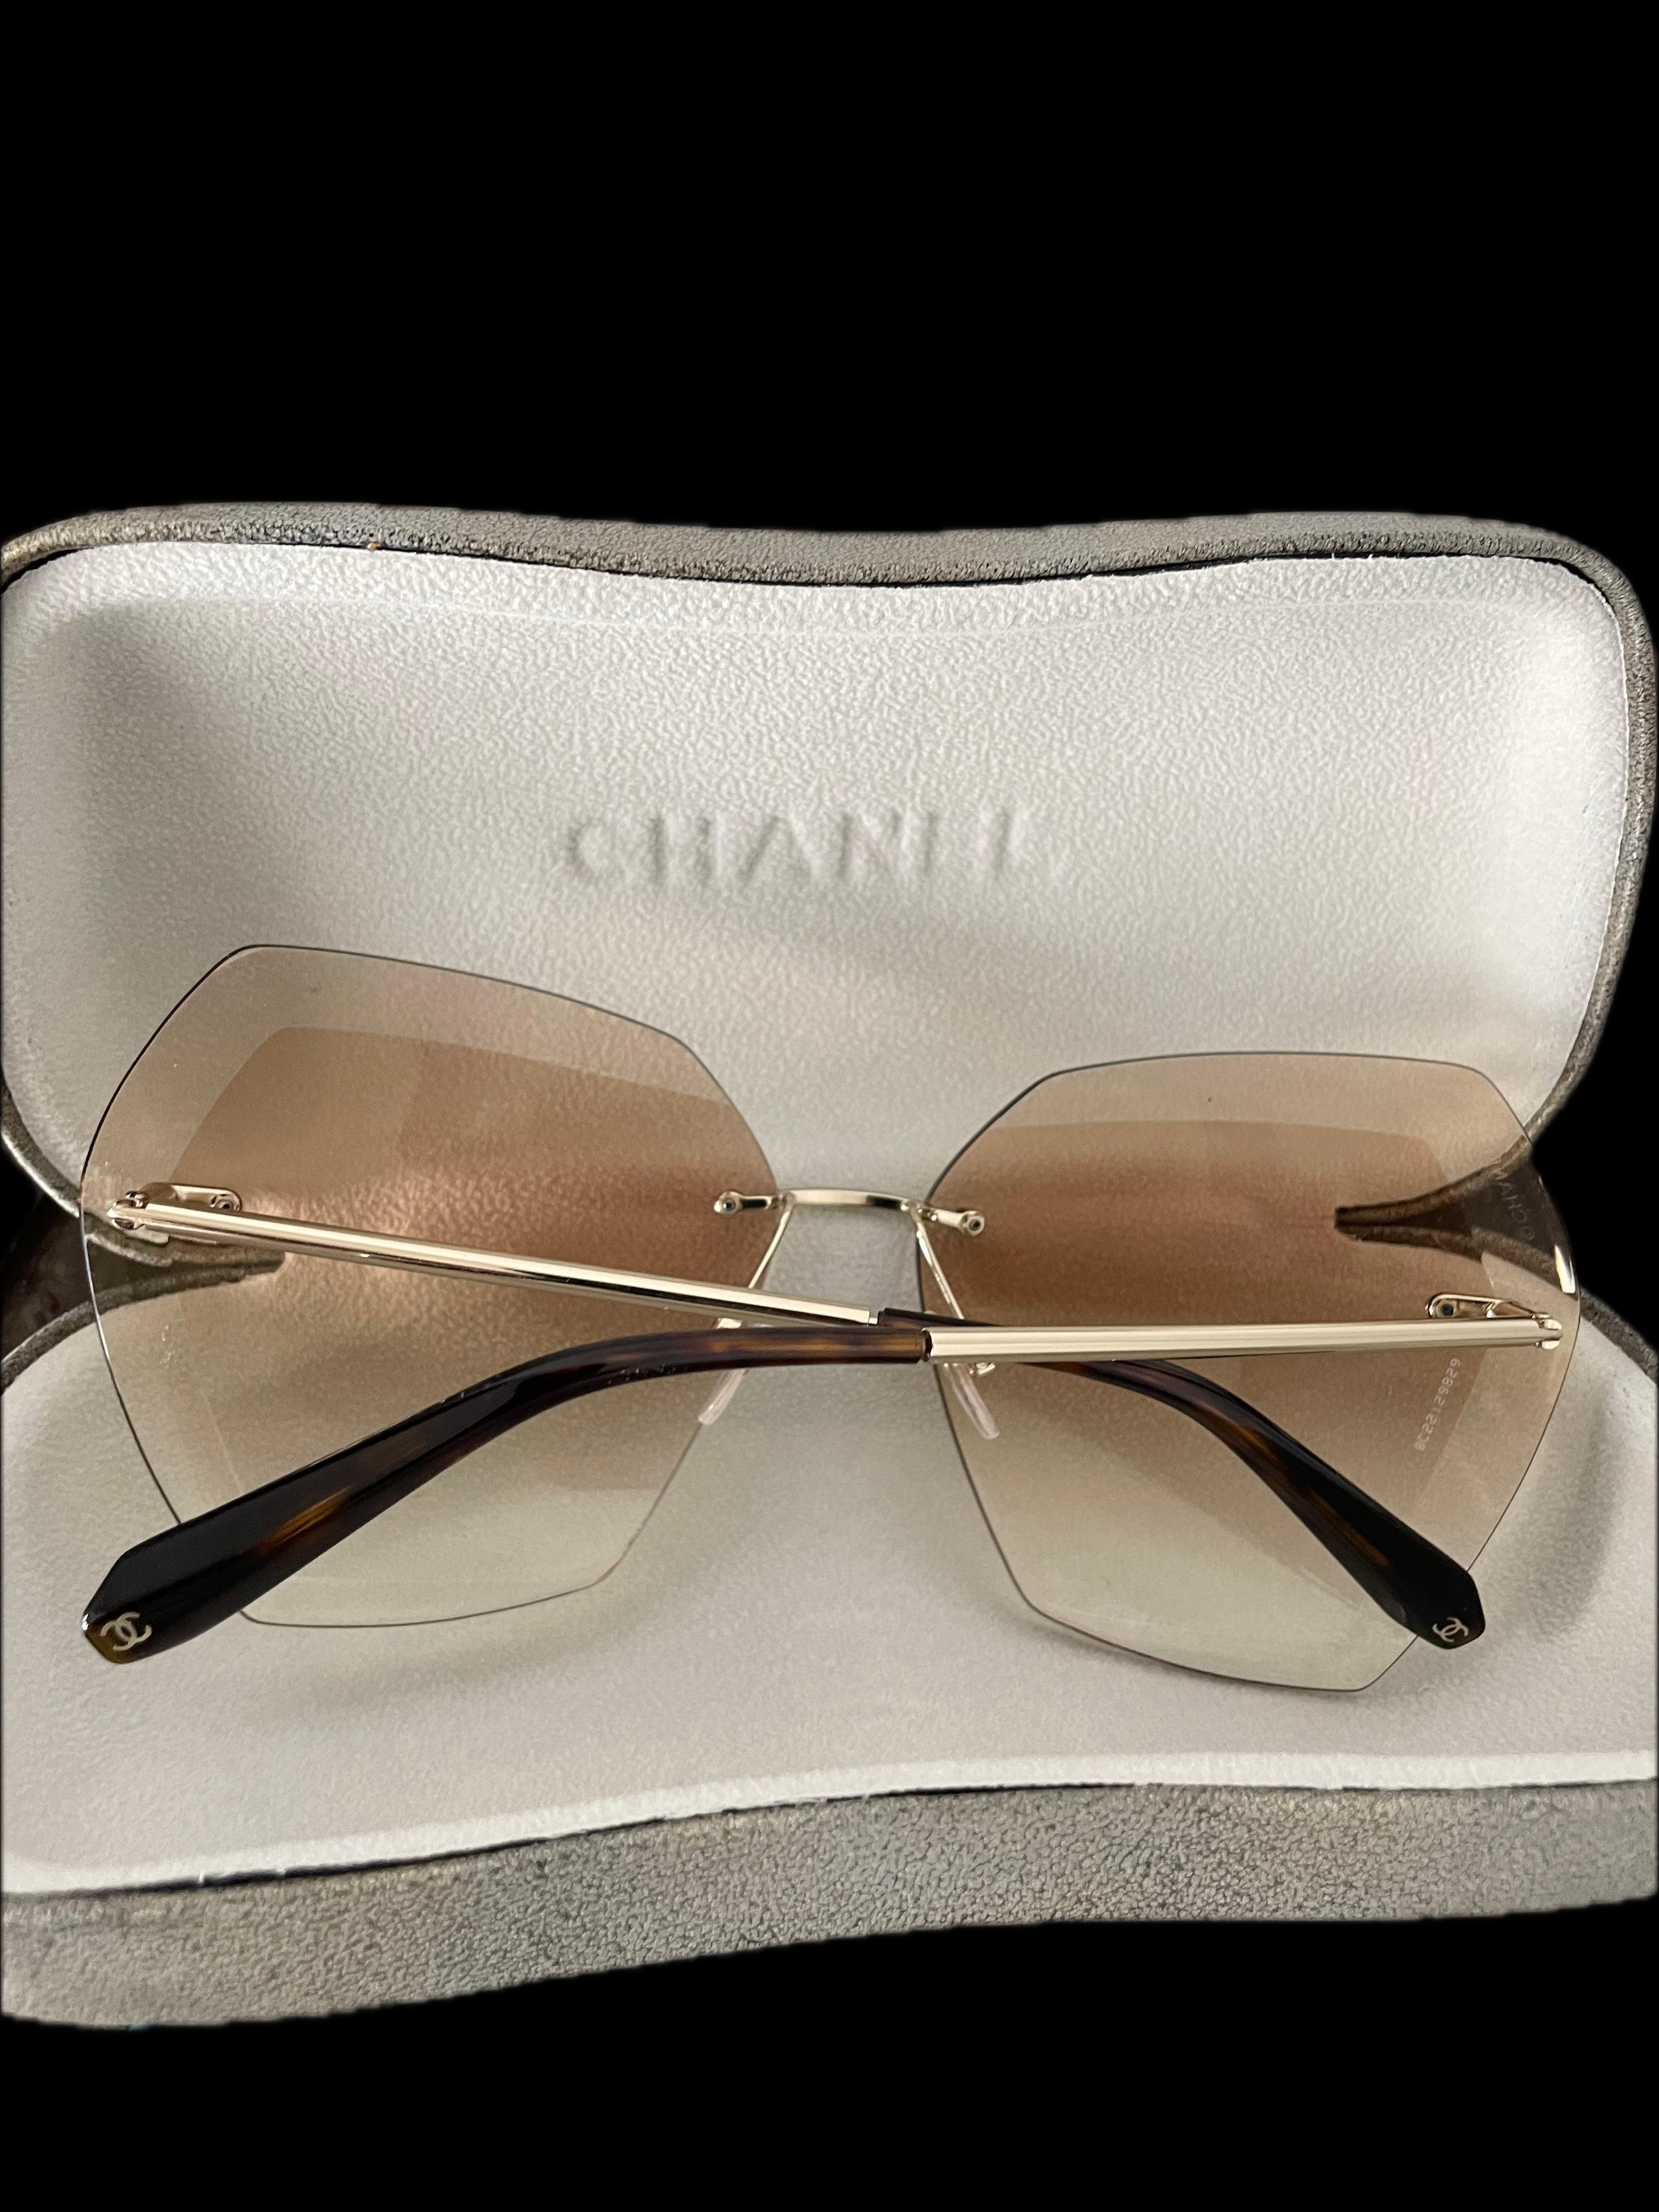 Chanel over size Sunglass For Sale 1